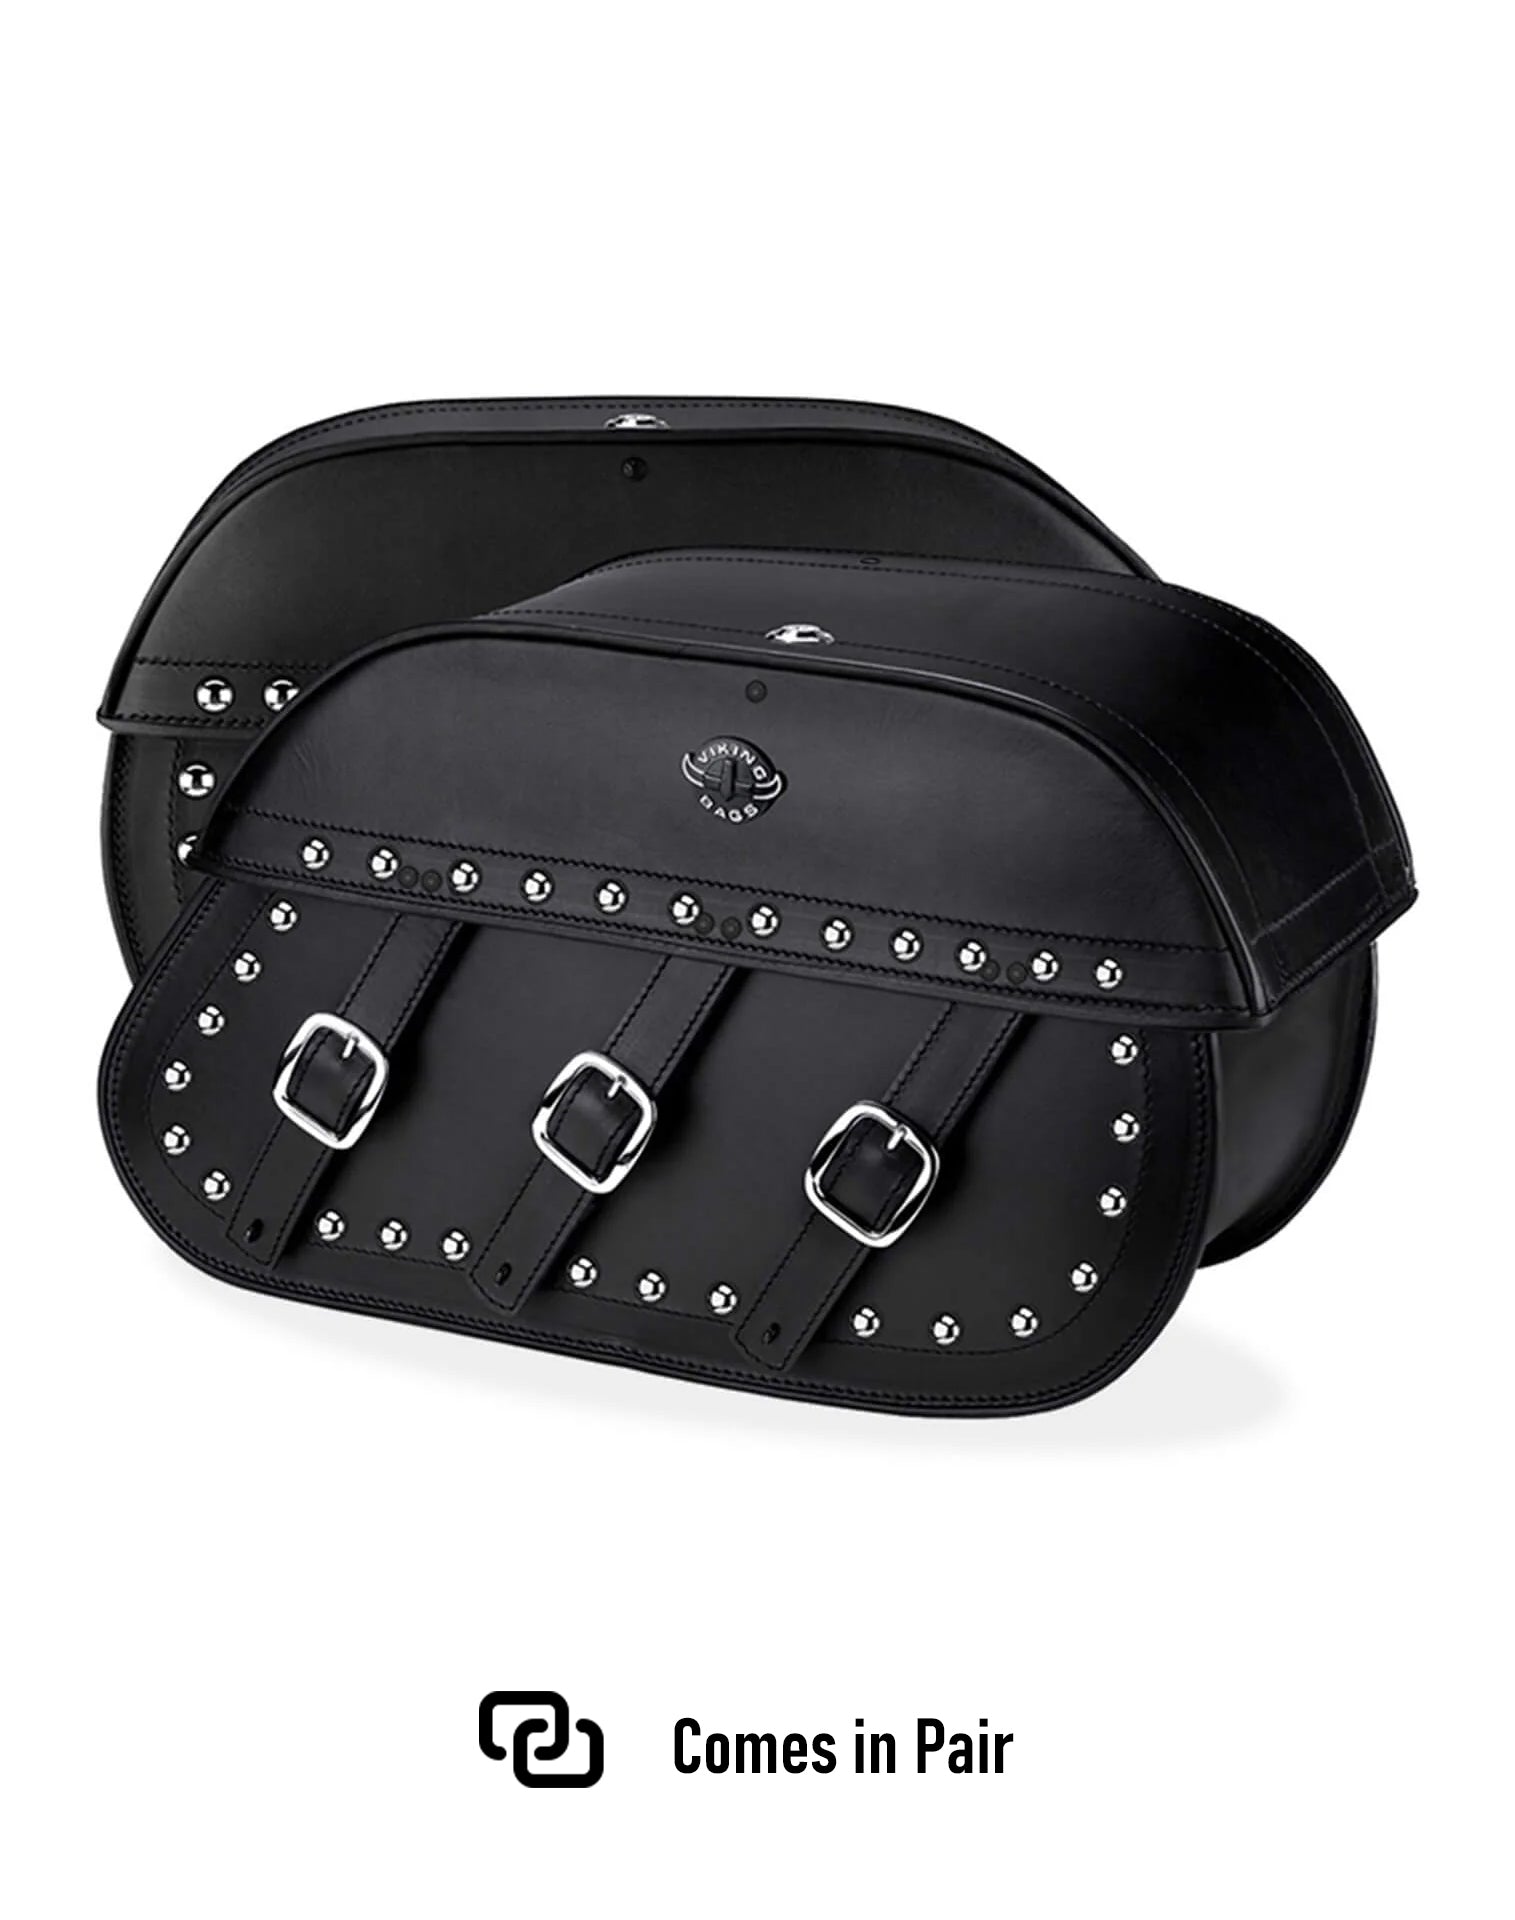 Viking Trianon Extra Large Victory High Ball Studded Leather Motorcycle Saddlebags Weather Resistant Bags Comes in Pair